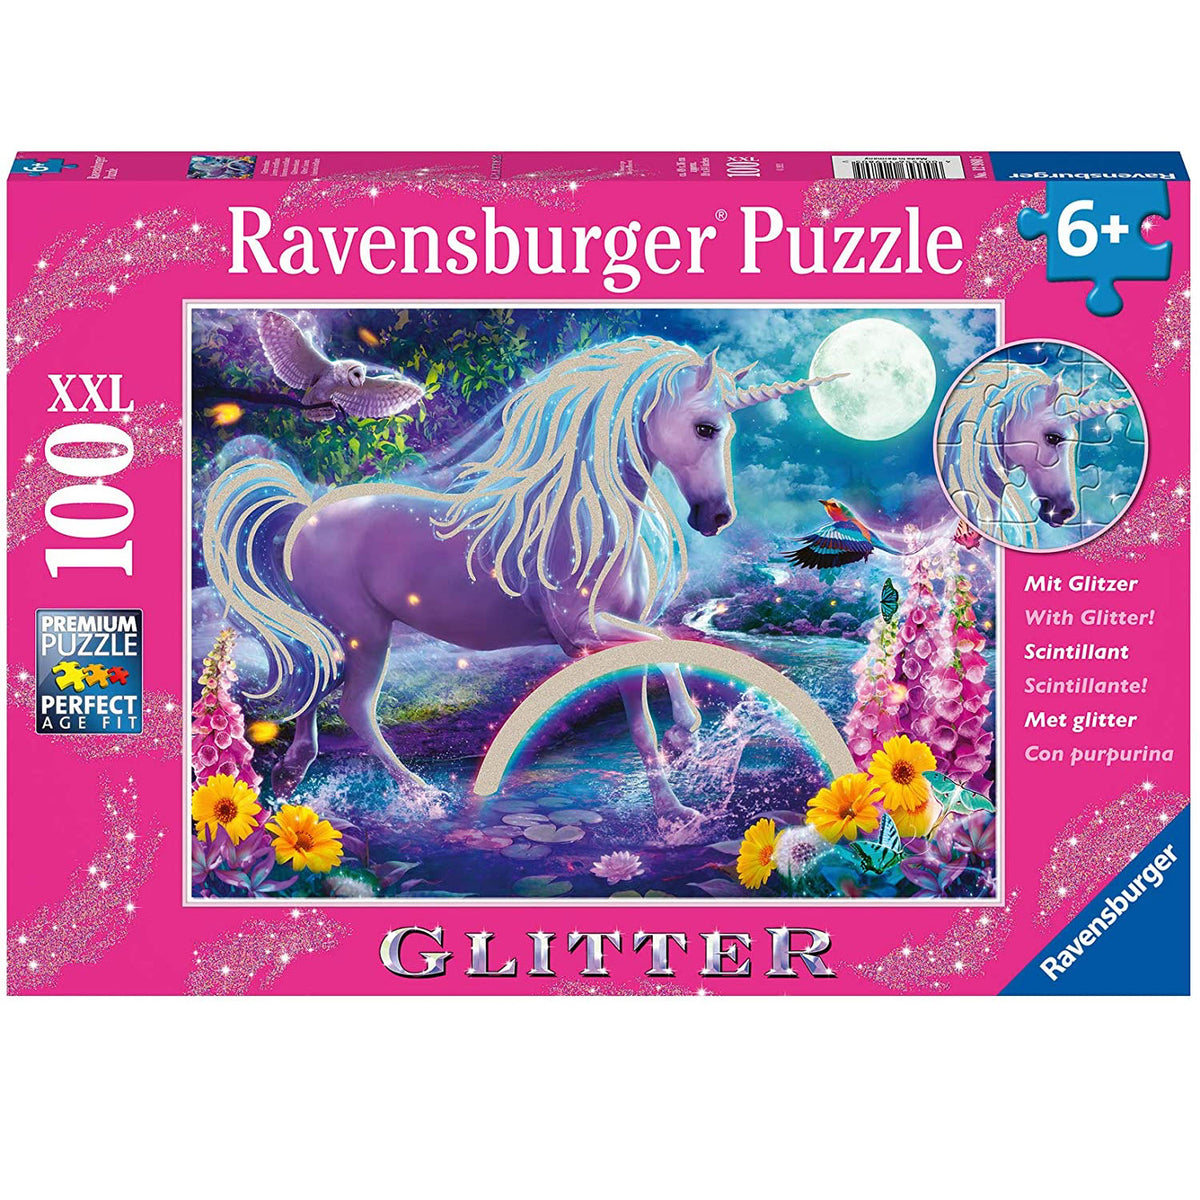 Ravensburger Pokemon Jigsaw Puzzles for Kids Age 6 Years Up - XXL